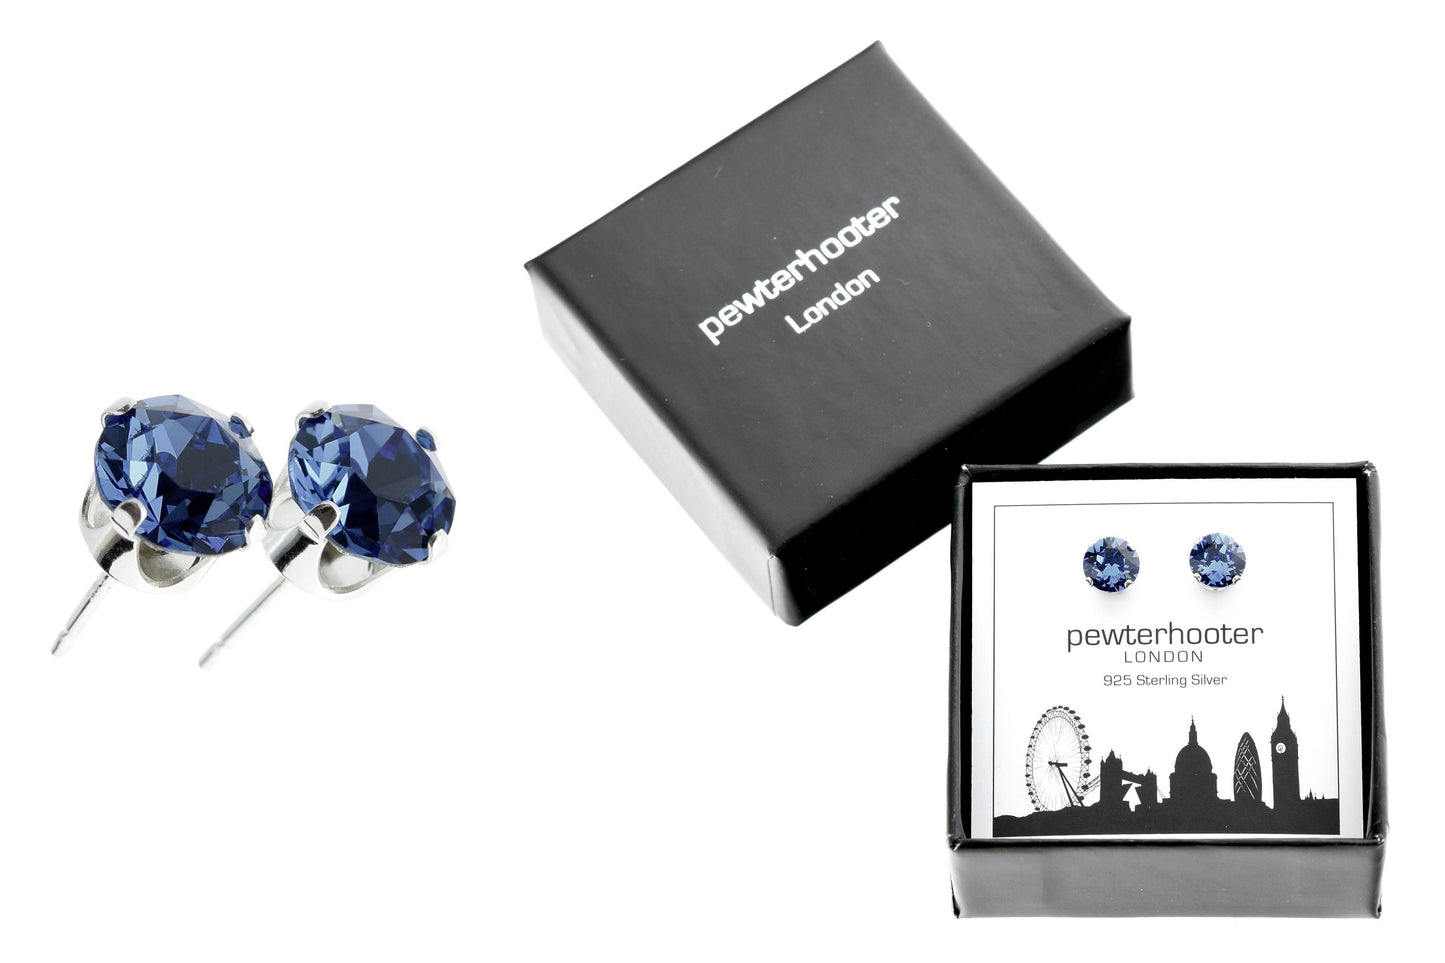 pewterhooter® Women's Classic Collection 925 Sterling silver earrings with sparkling Montana Blue crystals, packaged in a gift box for any occasion.